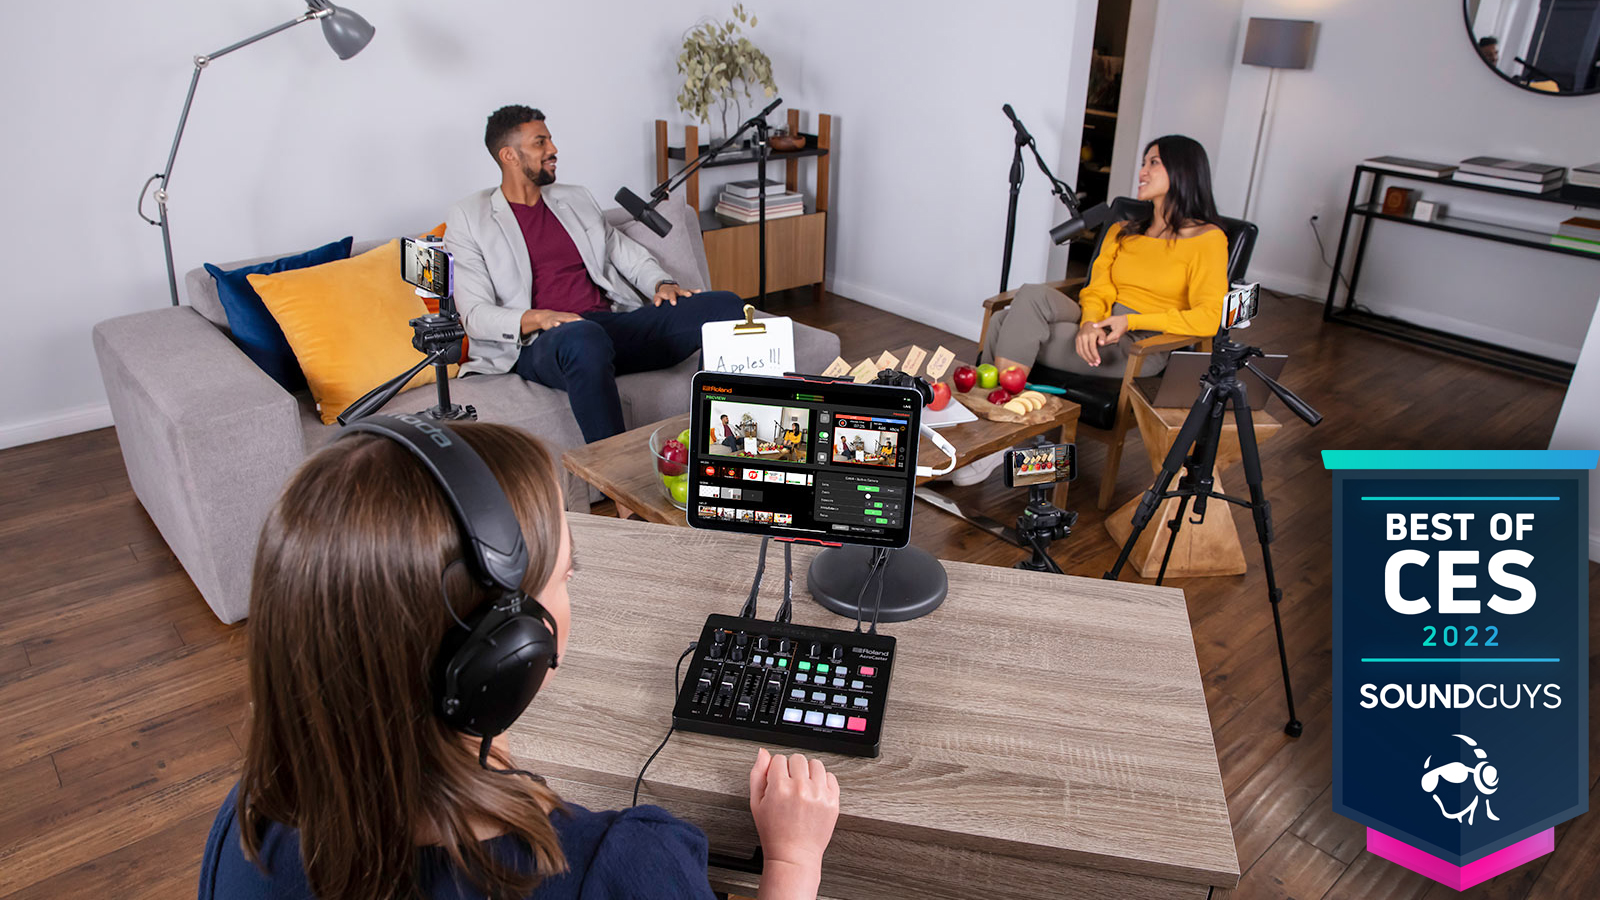 the Roland AeroCast platform being used in a living room setting with two subjects.